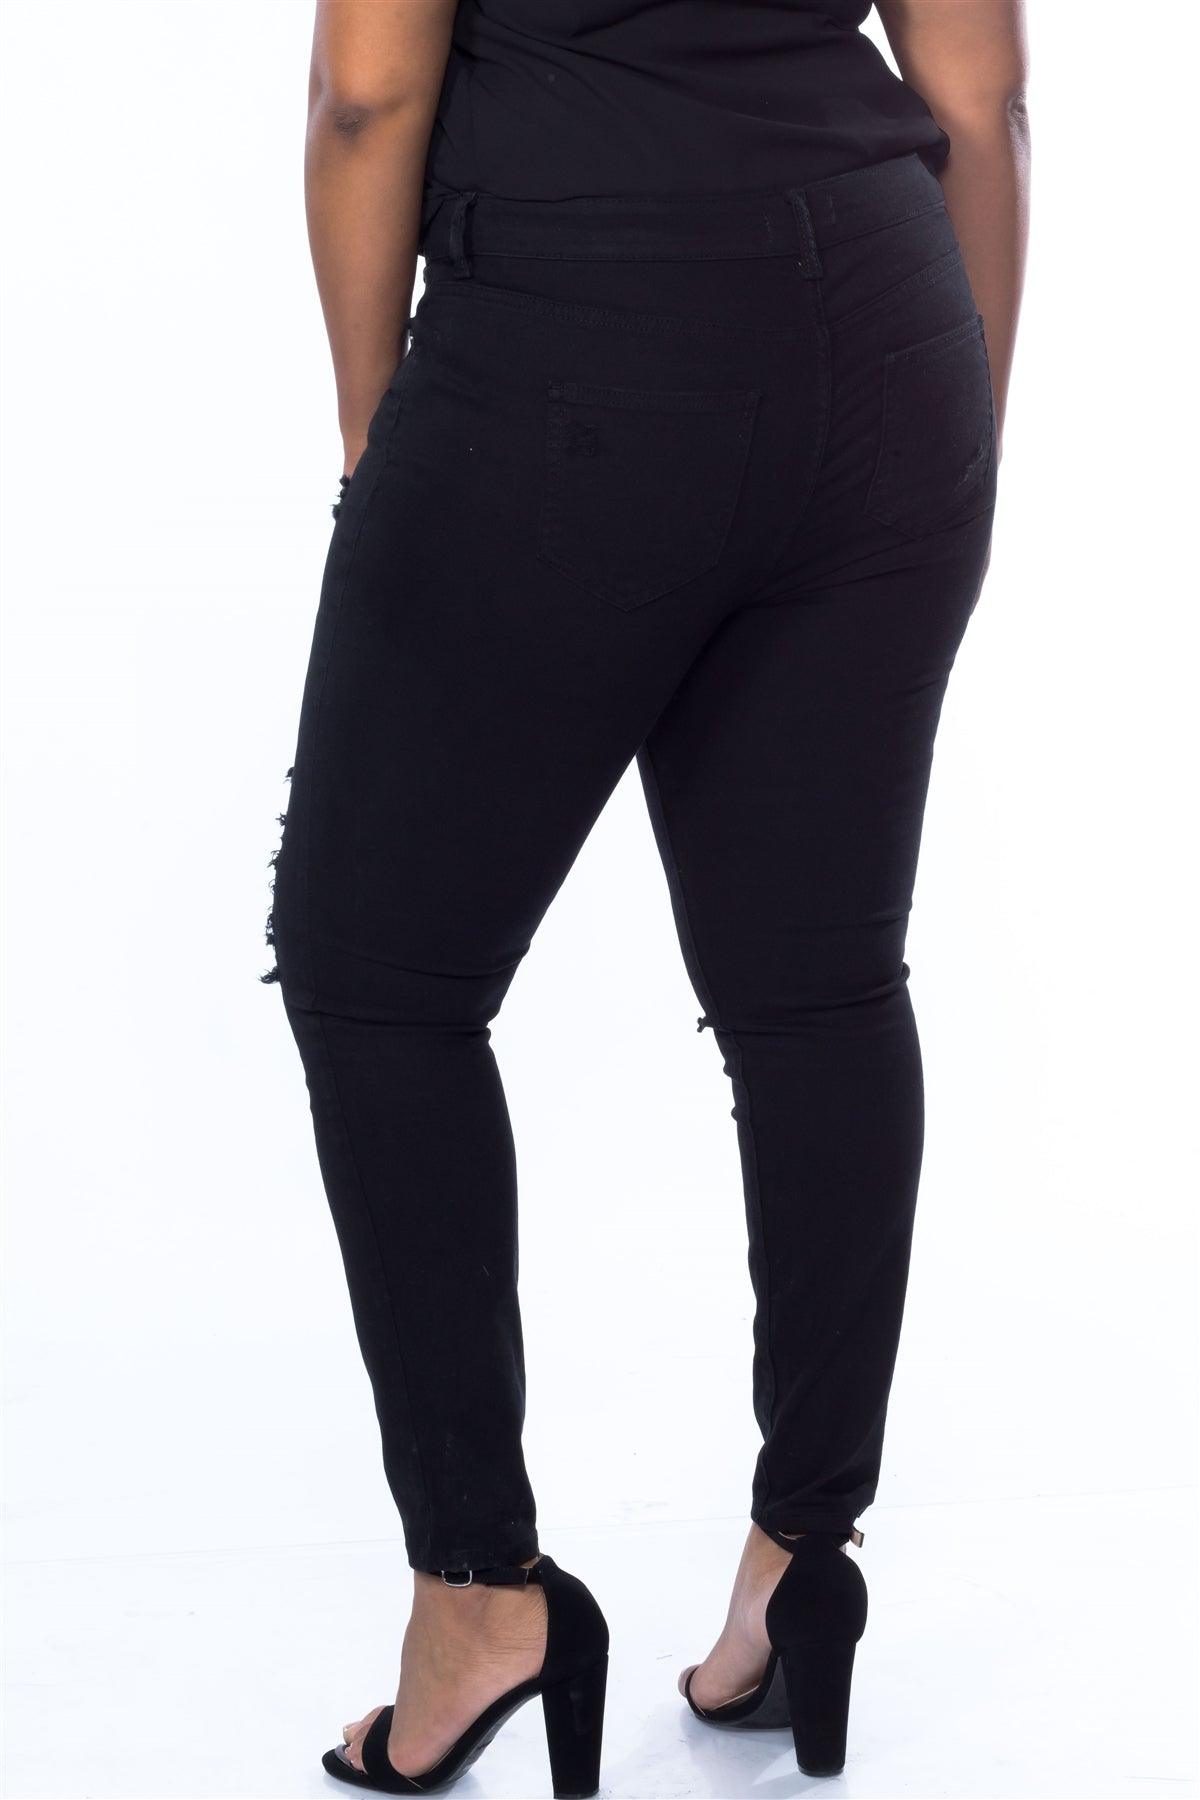 Junior Plus Size Made in Egypt Cotton Spandex Black Distressed Ripped Skinny Jeans /1-2-2-2-1